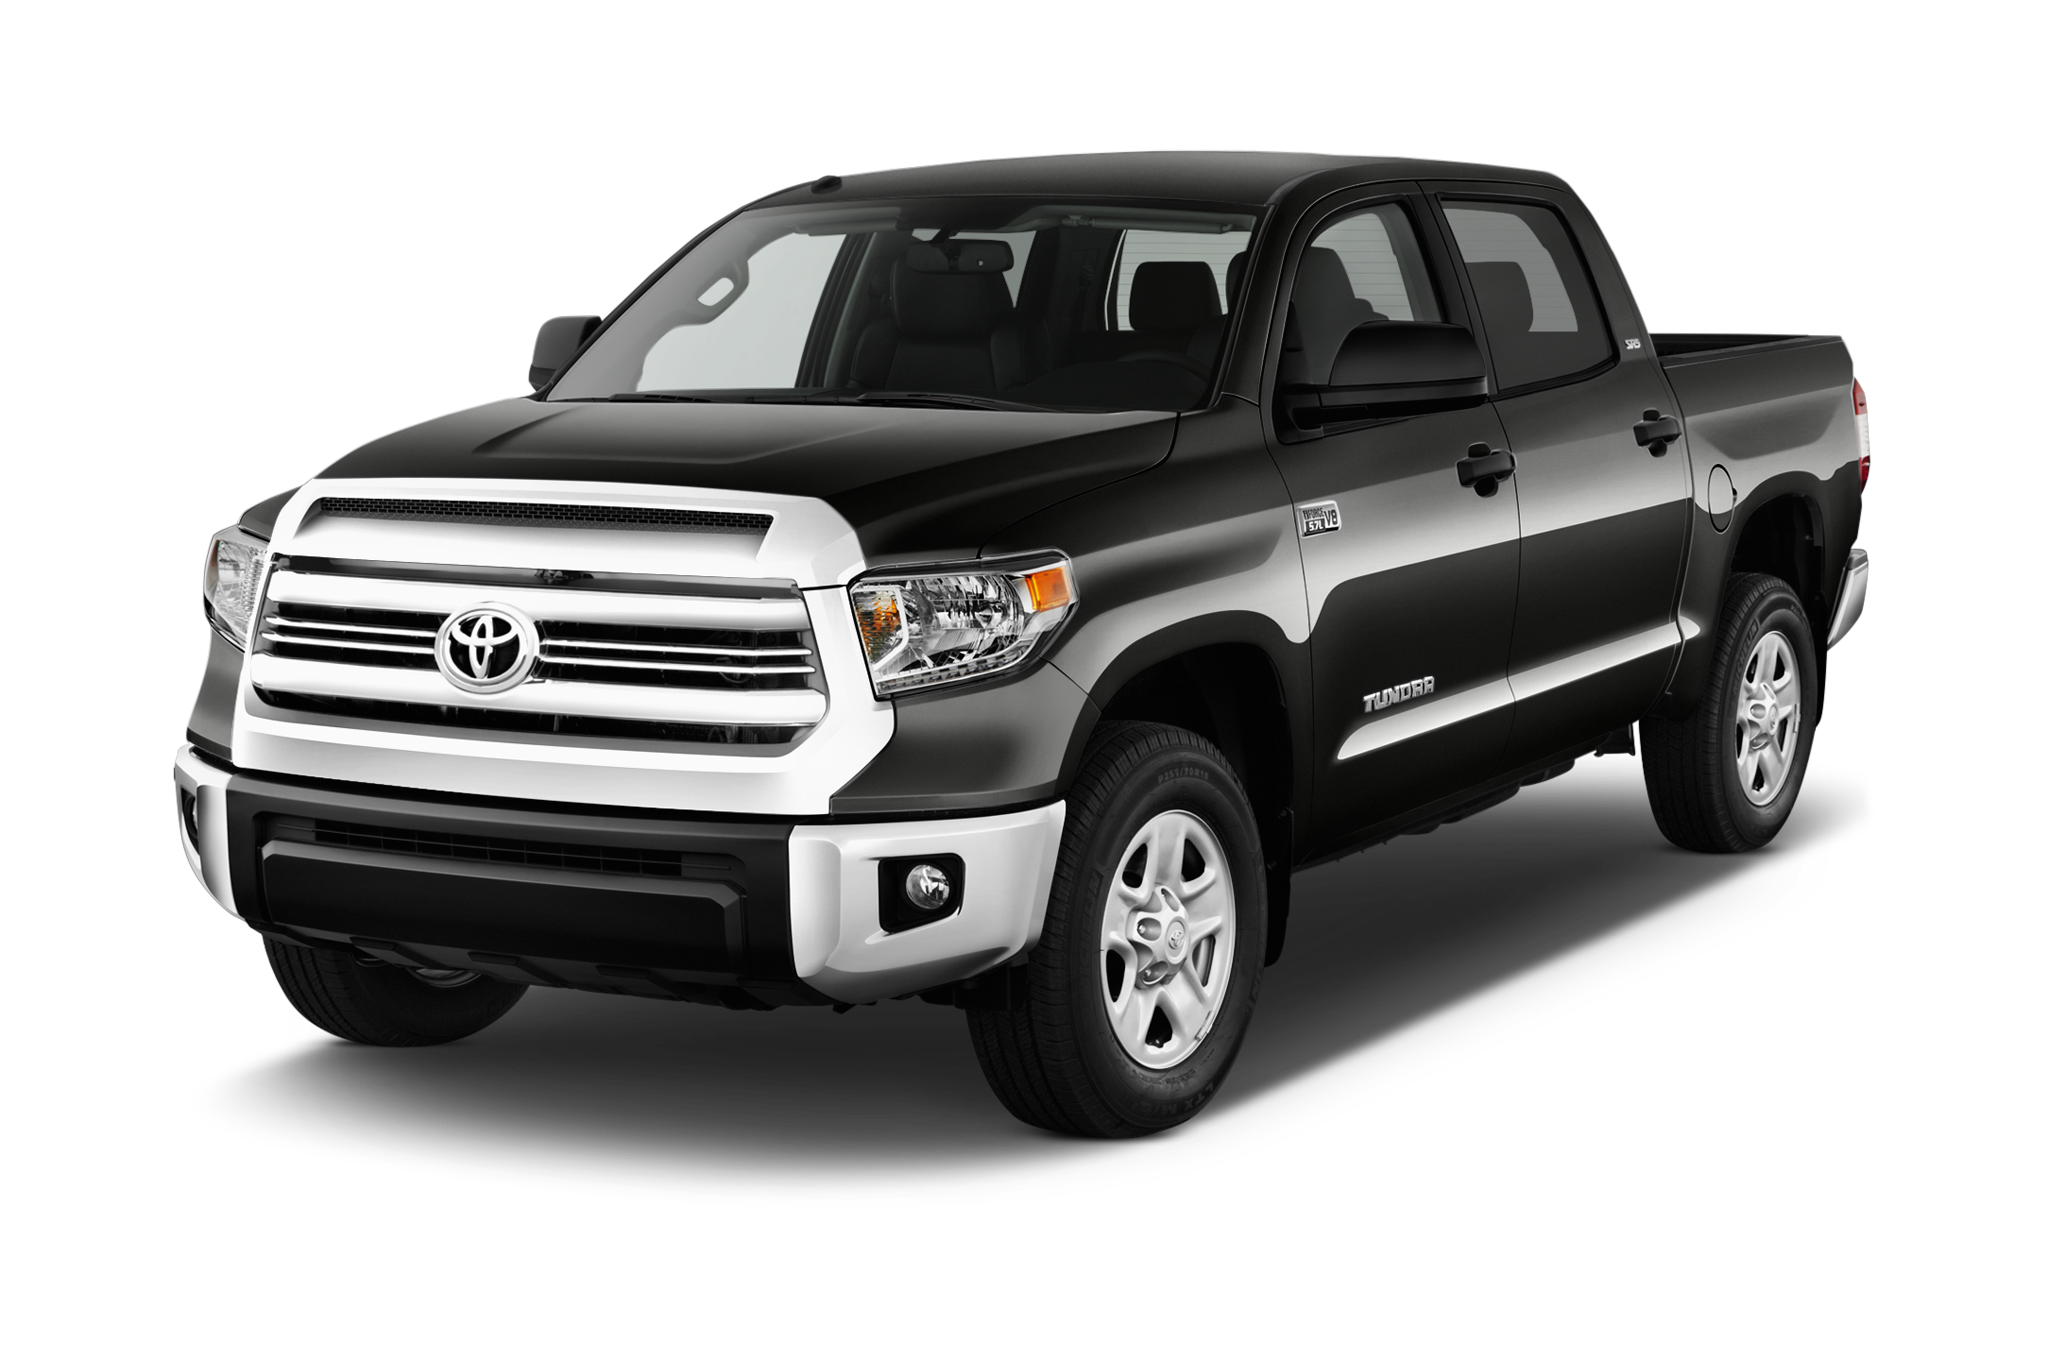 2017 Toyota Tundra SR5 5.7L Crew Max Short Bed Specs and Features - MSN